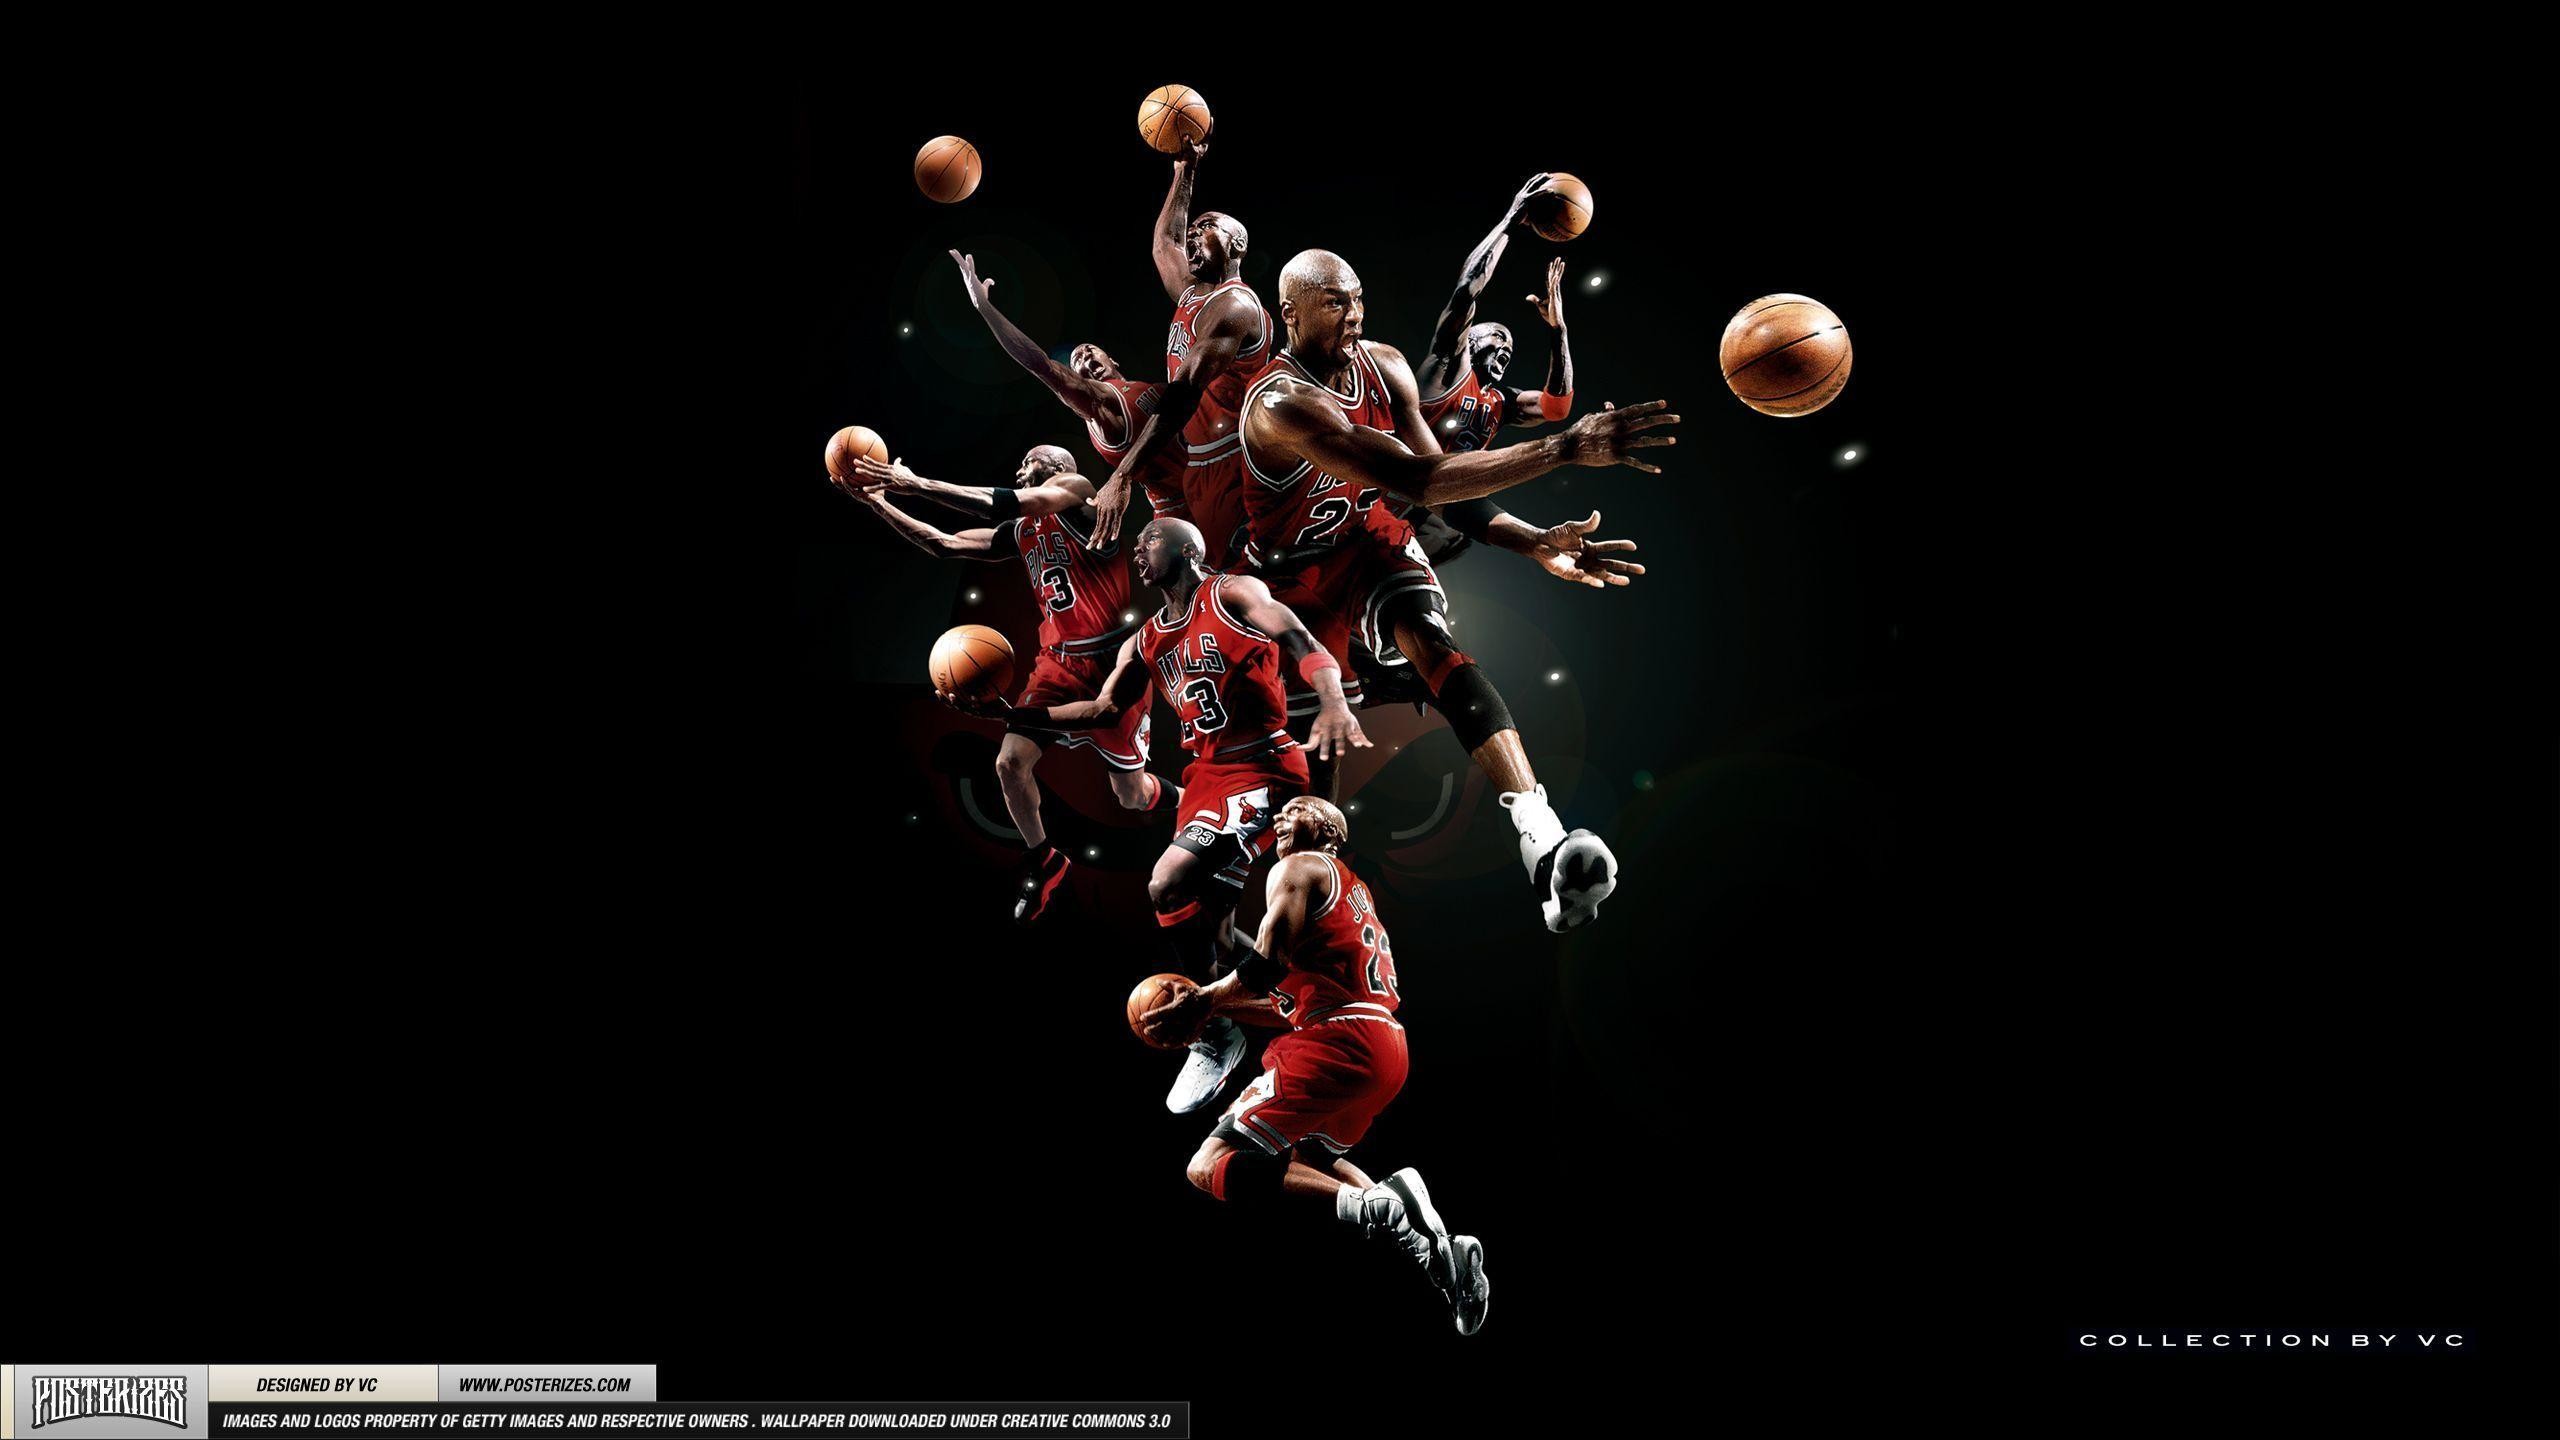 Michael Jordan Hd Wallpapers and Background